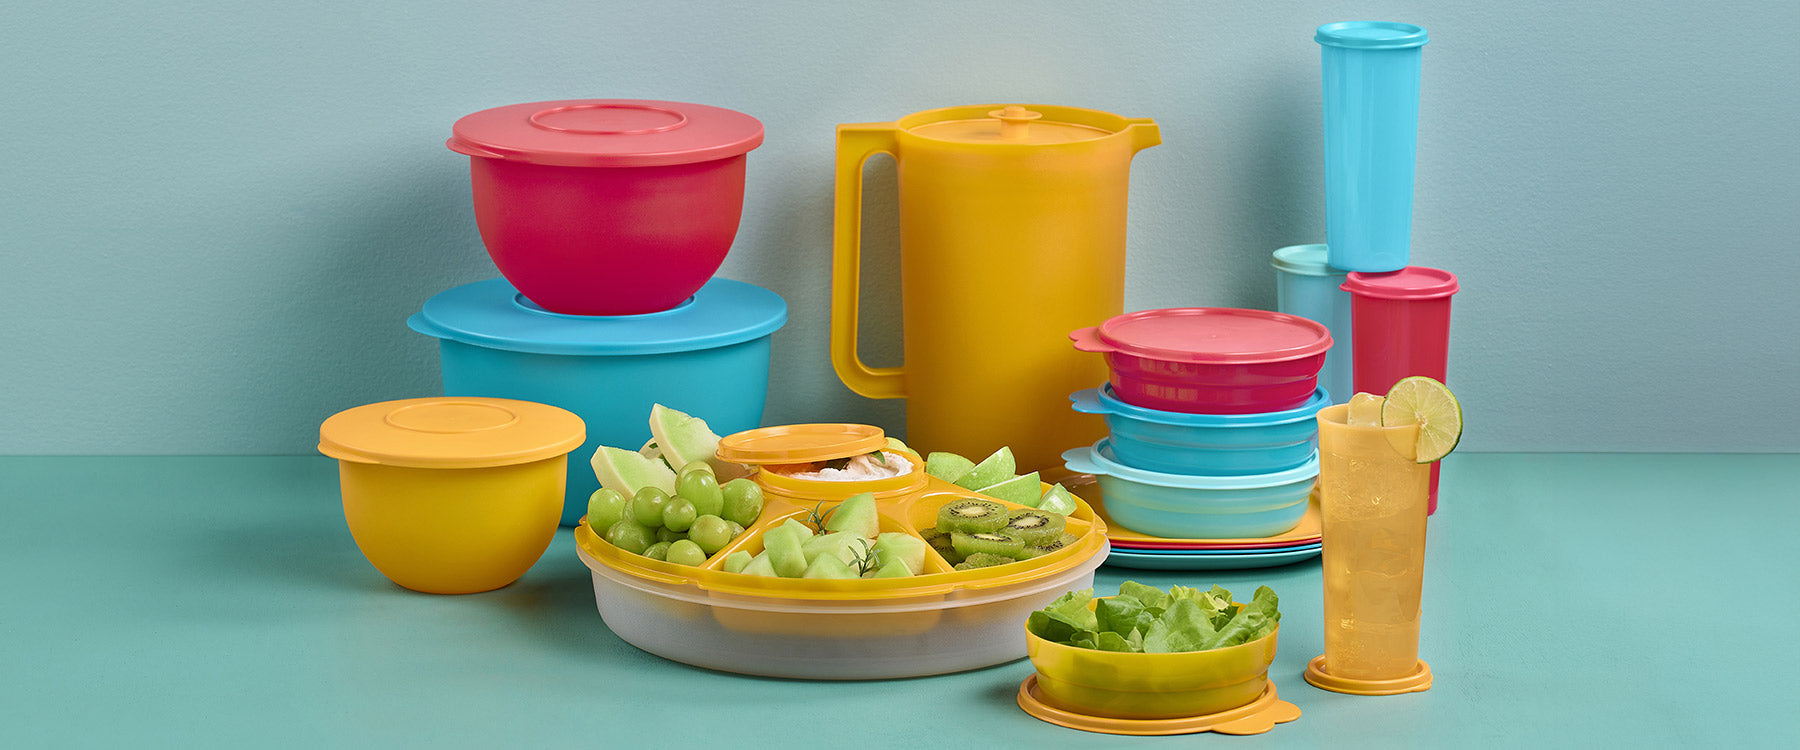 Tupperware Philippines - Don't let your food get cold! These Insulated  Servers can keep your food warm for up to 90 minutes, and are good in the  fridge or on the dinner